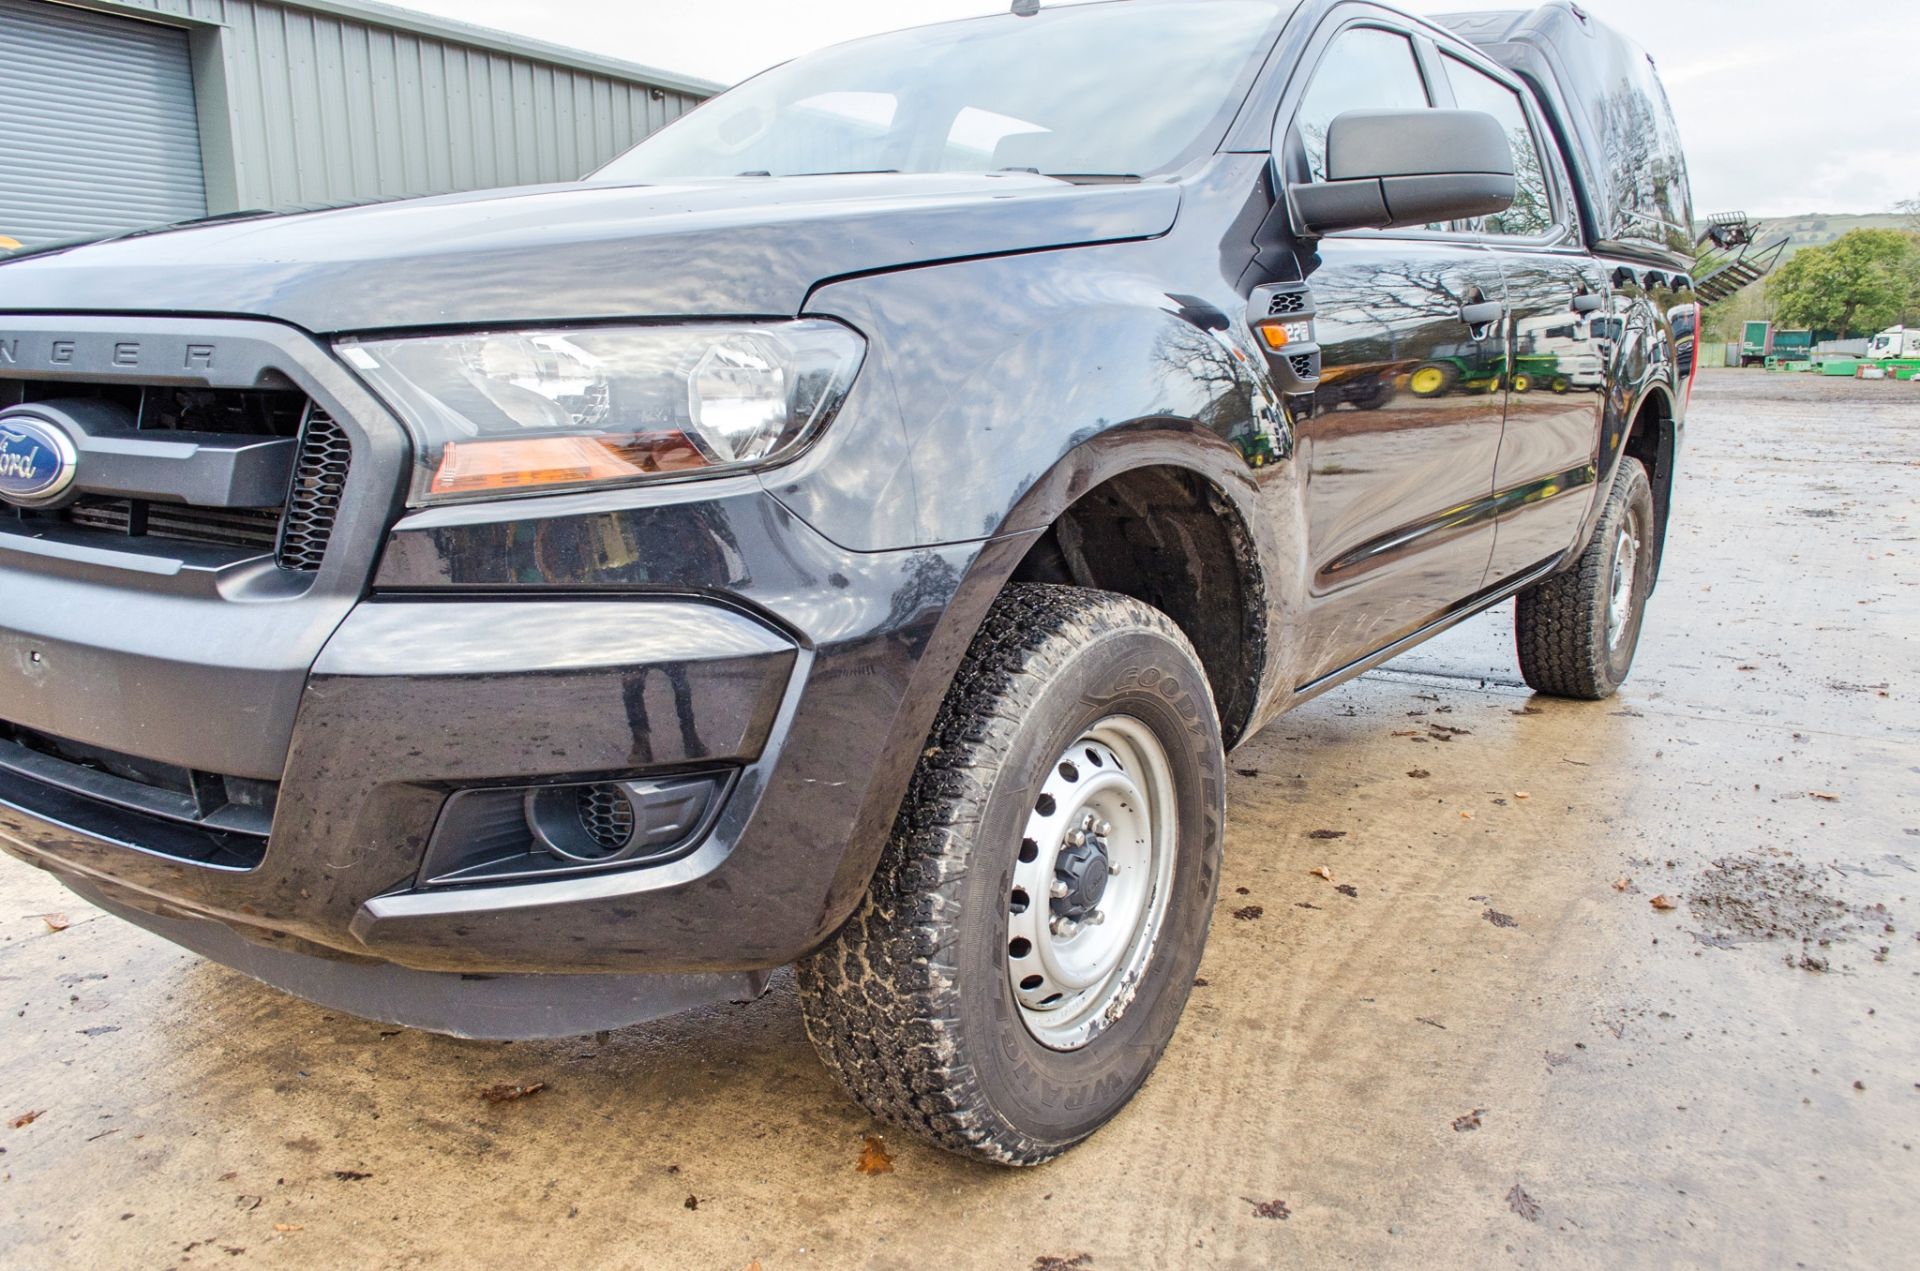 Ford Ranger 2.2 TDCI 160 XL double cab pick up (Ex MOD) VIN: 6FPPXXMJ2PHU42742 Date of Entry into - Image 10 of 32